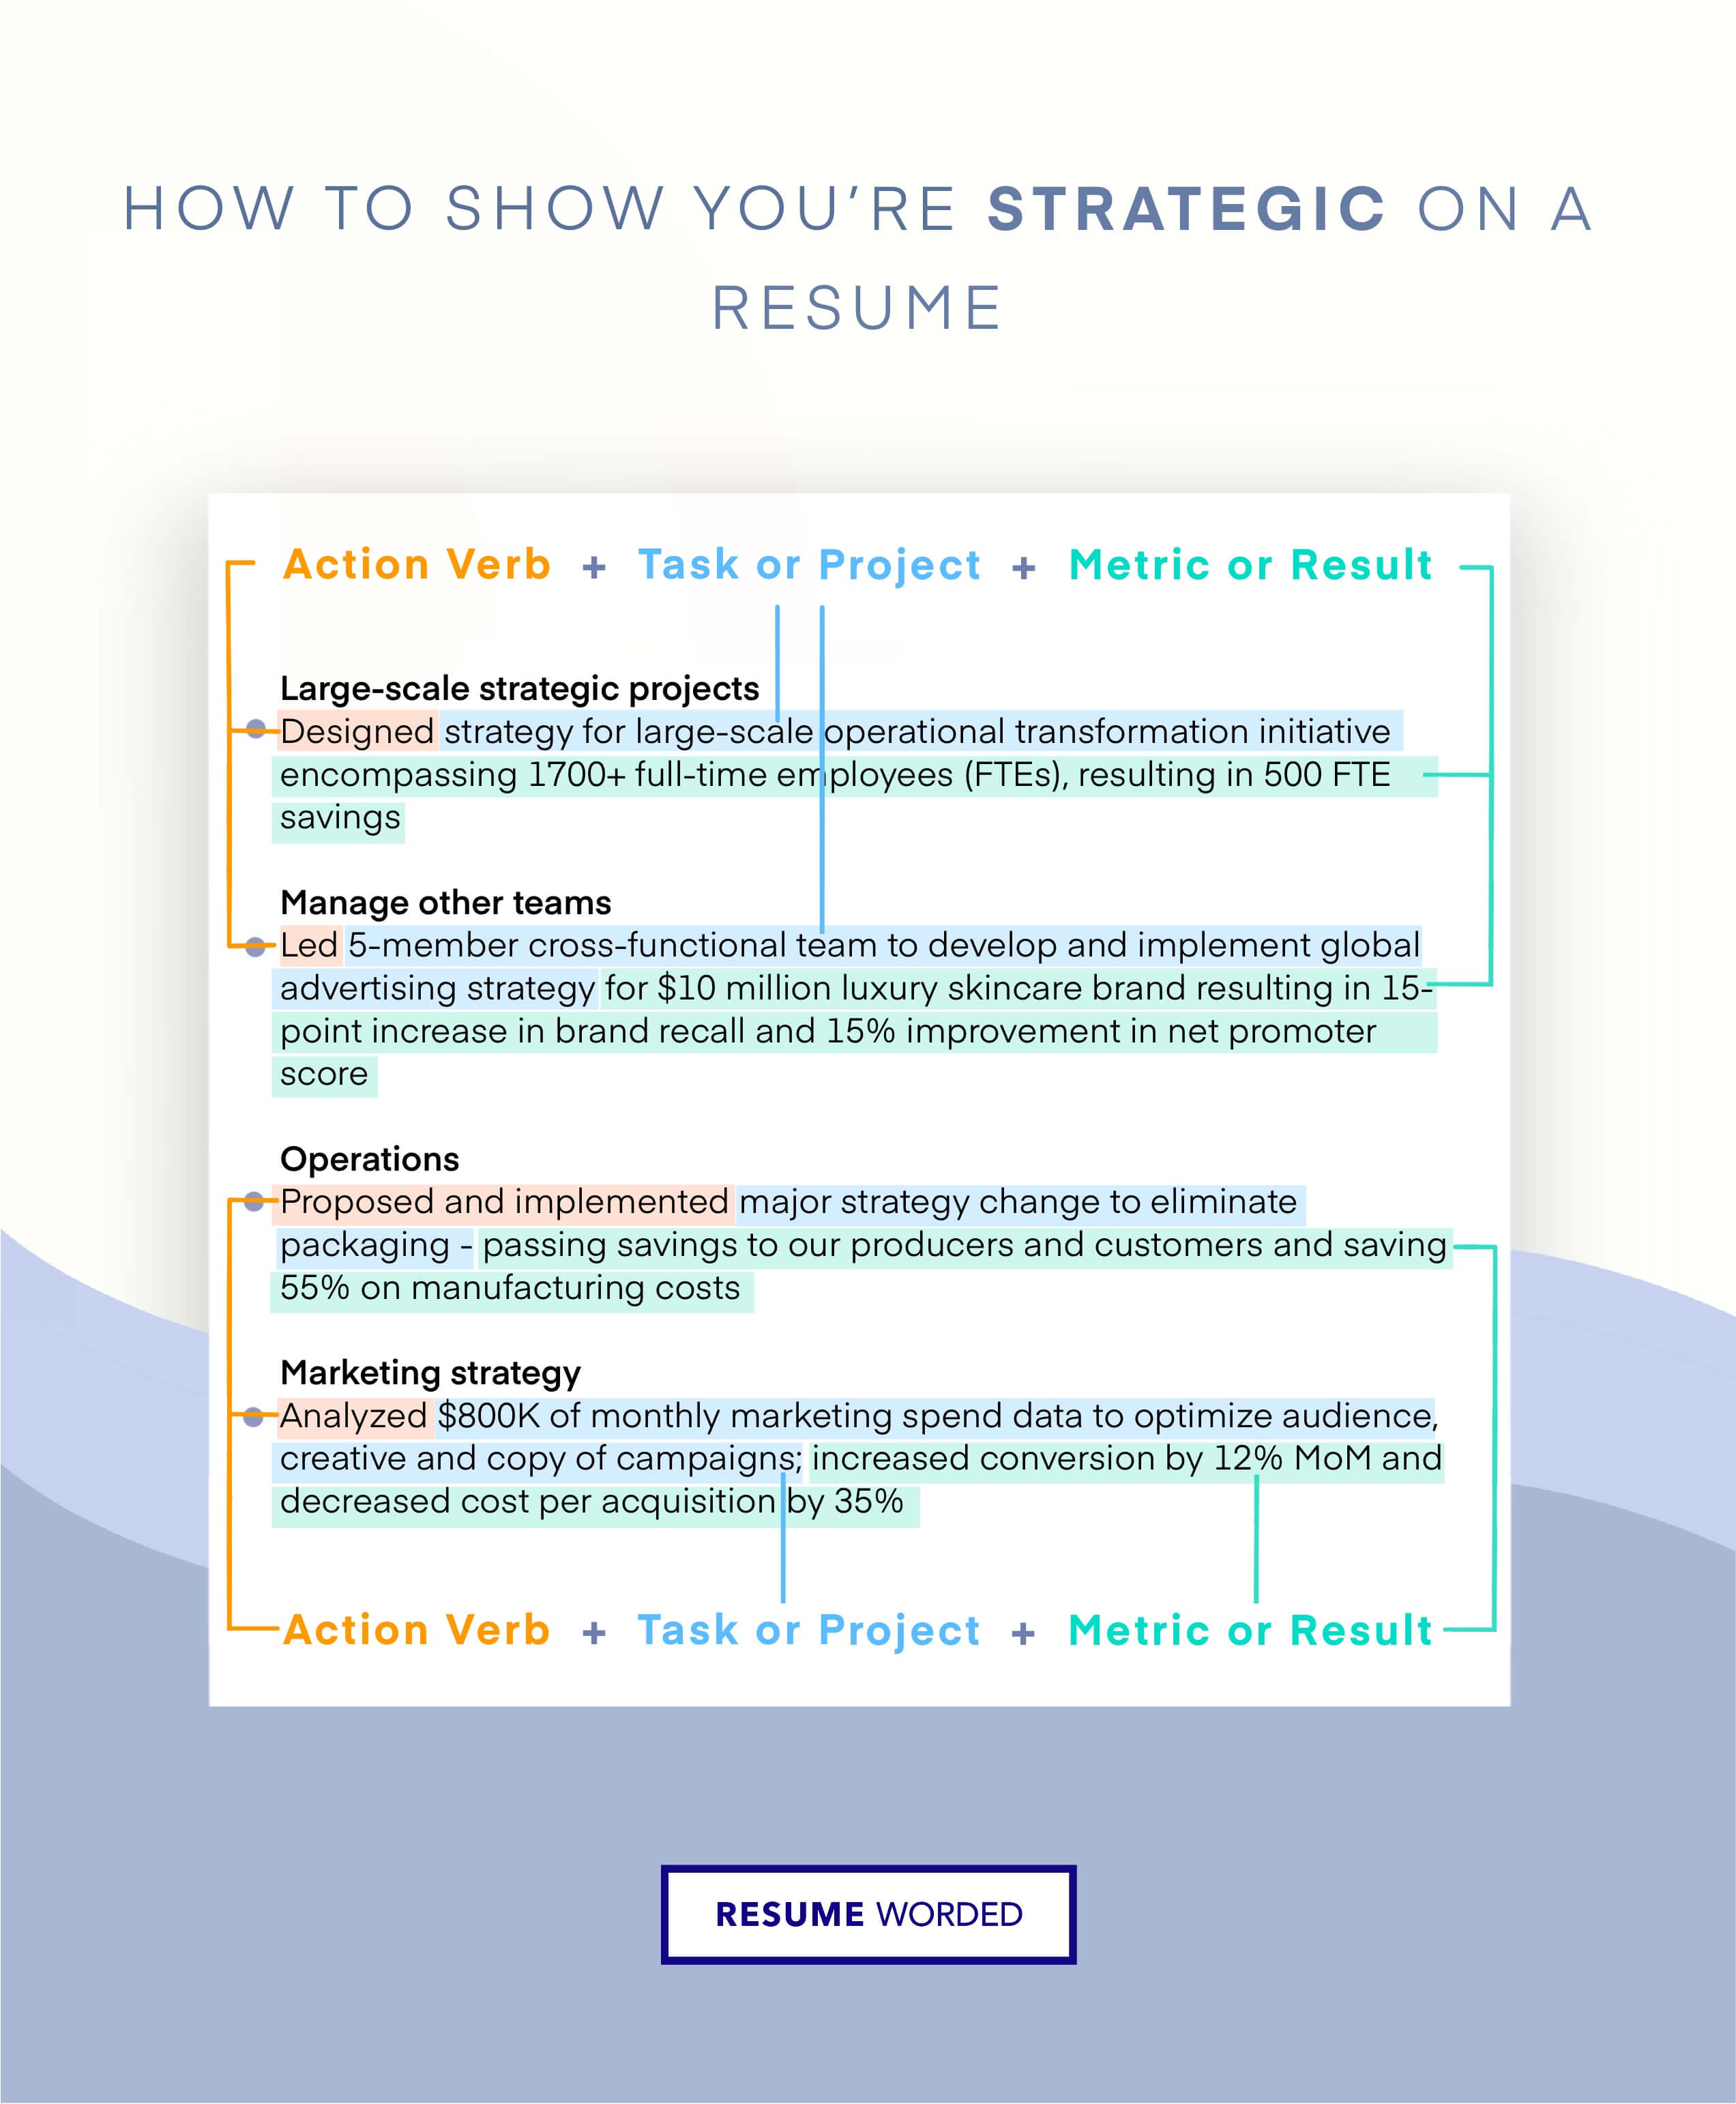 Demonstrate your ability to implement sales strategies and incentives - Retail Sales Manager Resume